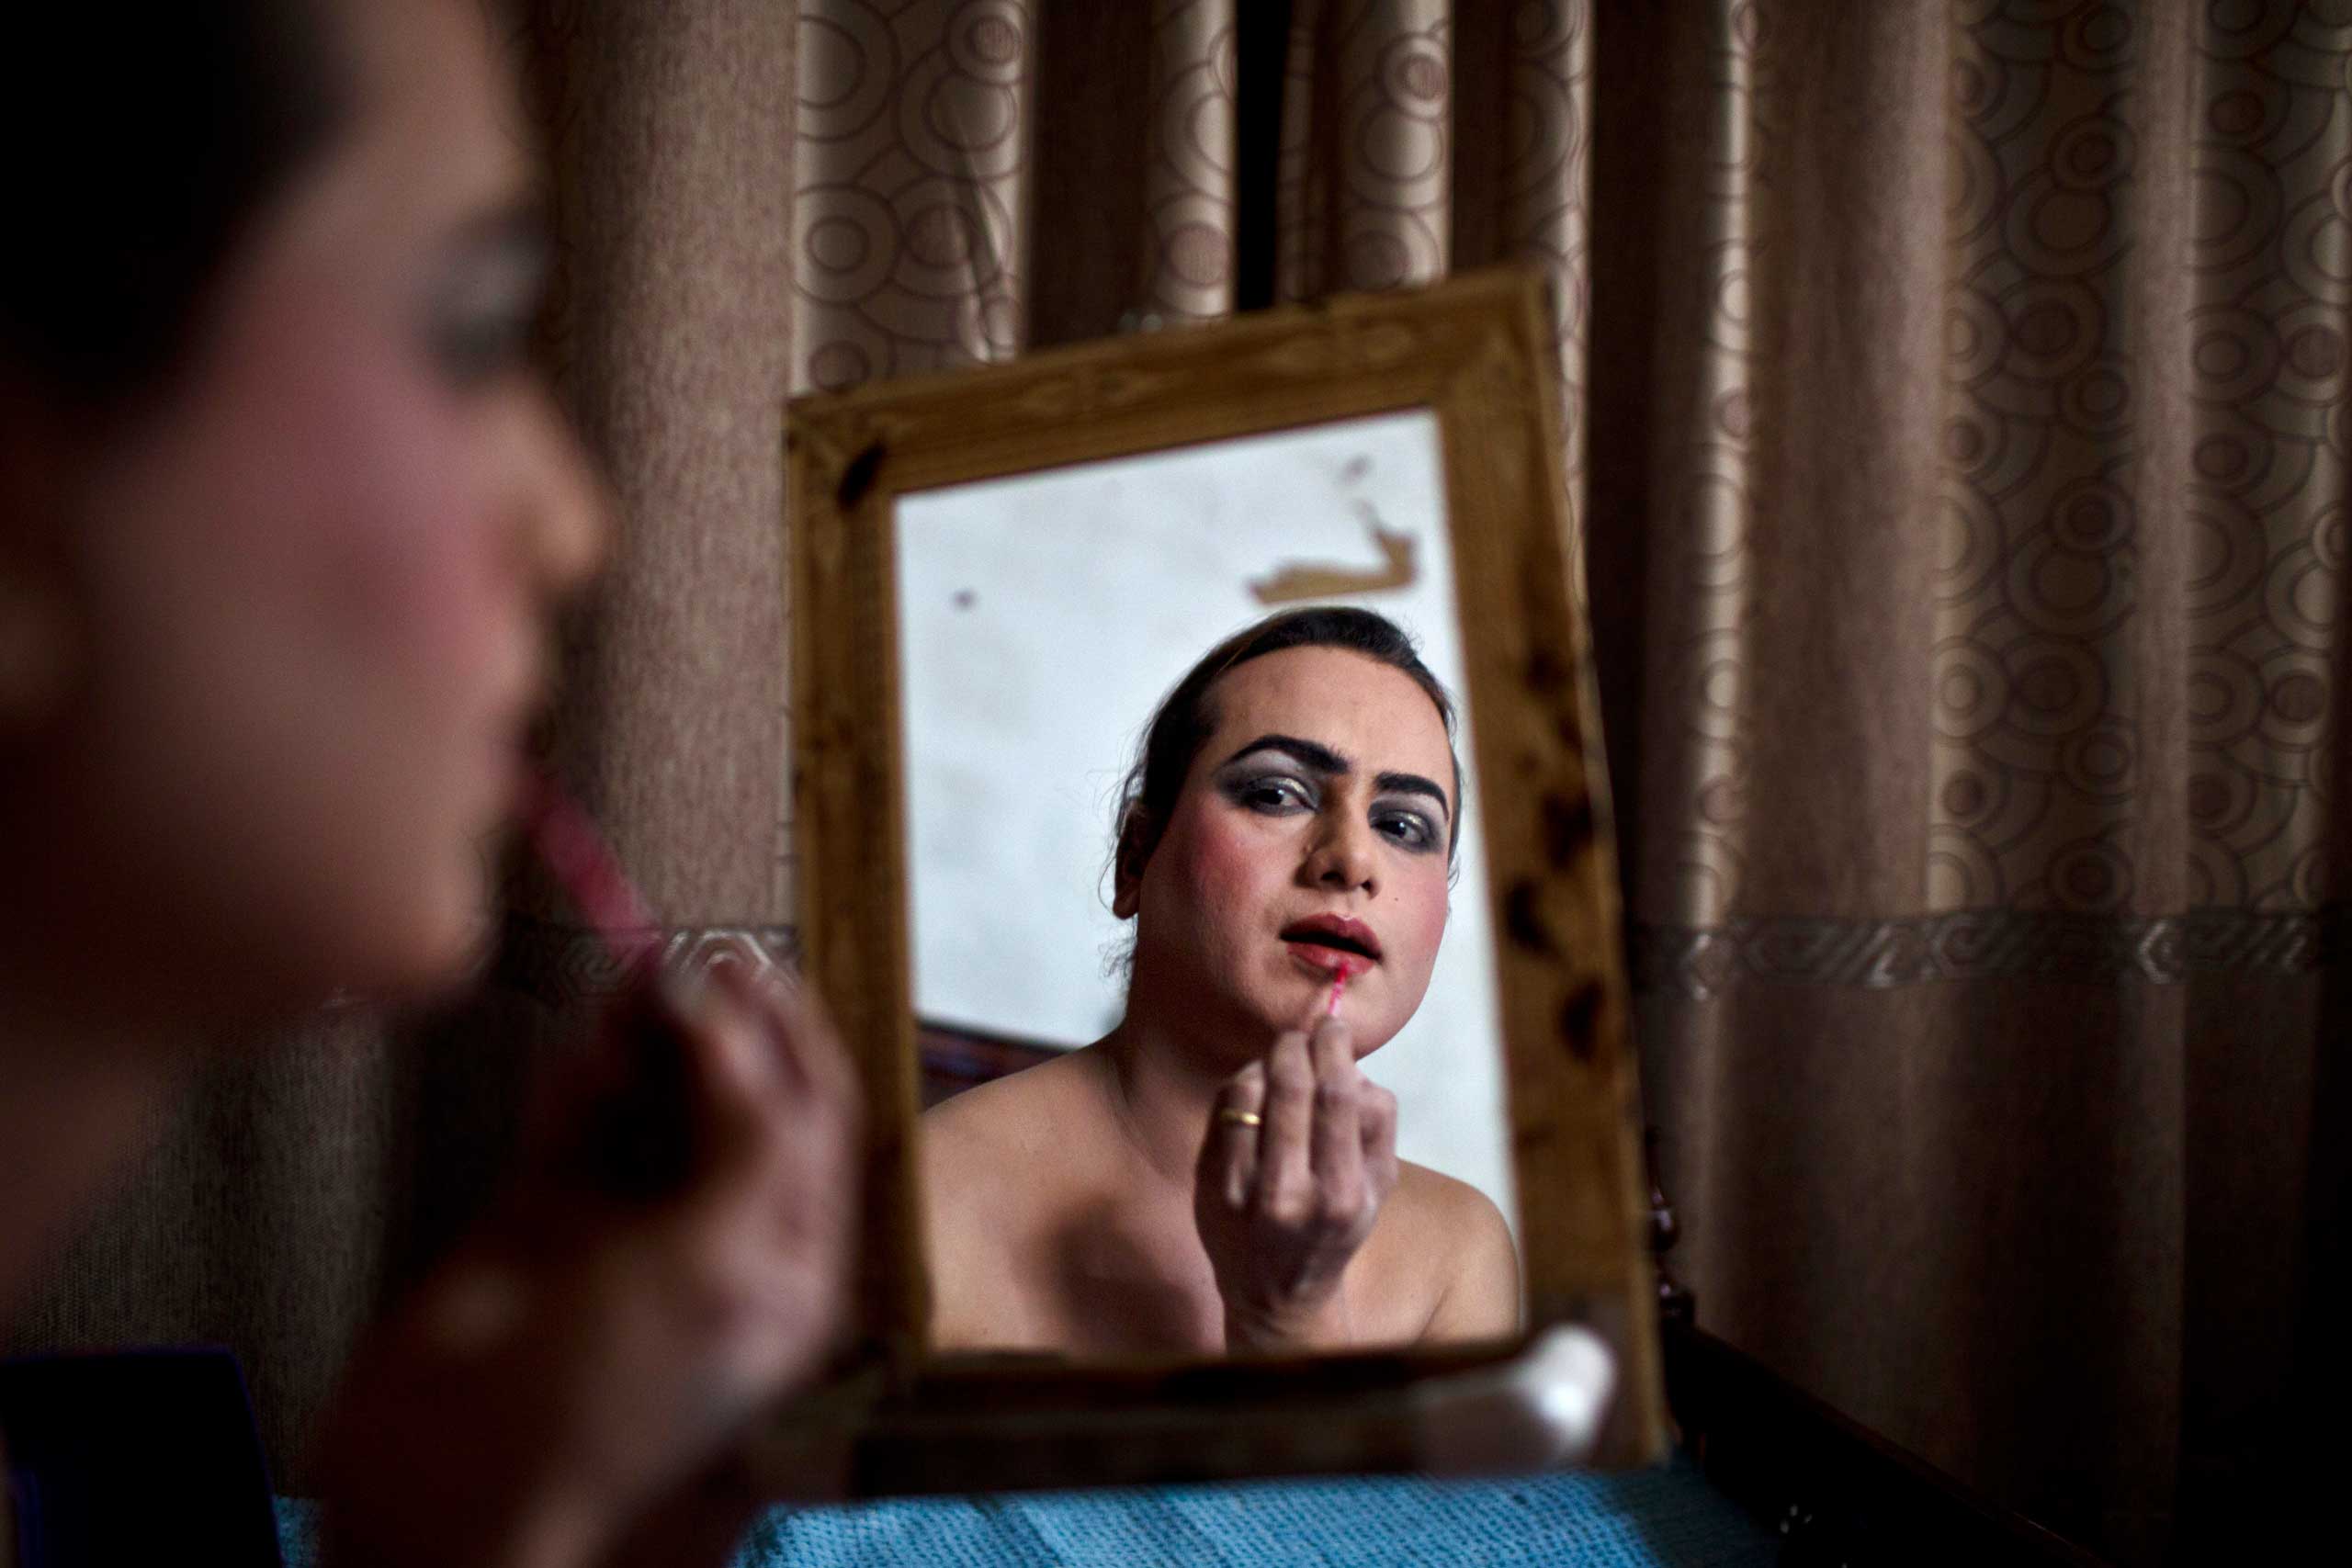 The Washington Post In Sight:  Leading a Double Life in PakistanWaseem Akram, 27, applies makeup on his face as he prepares himself for a party at a friend's place in Rawalpindi, Pakistan, Jan. 10, 2015.